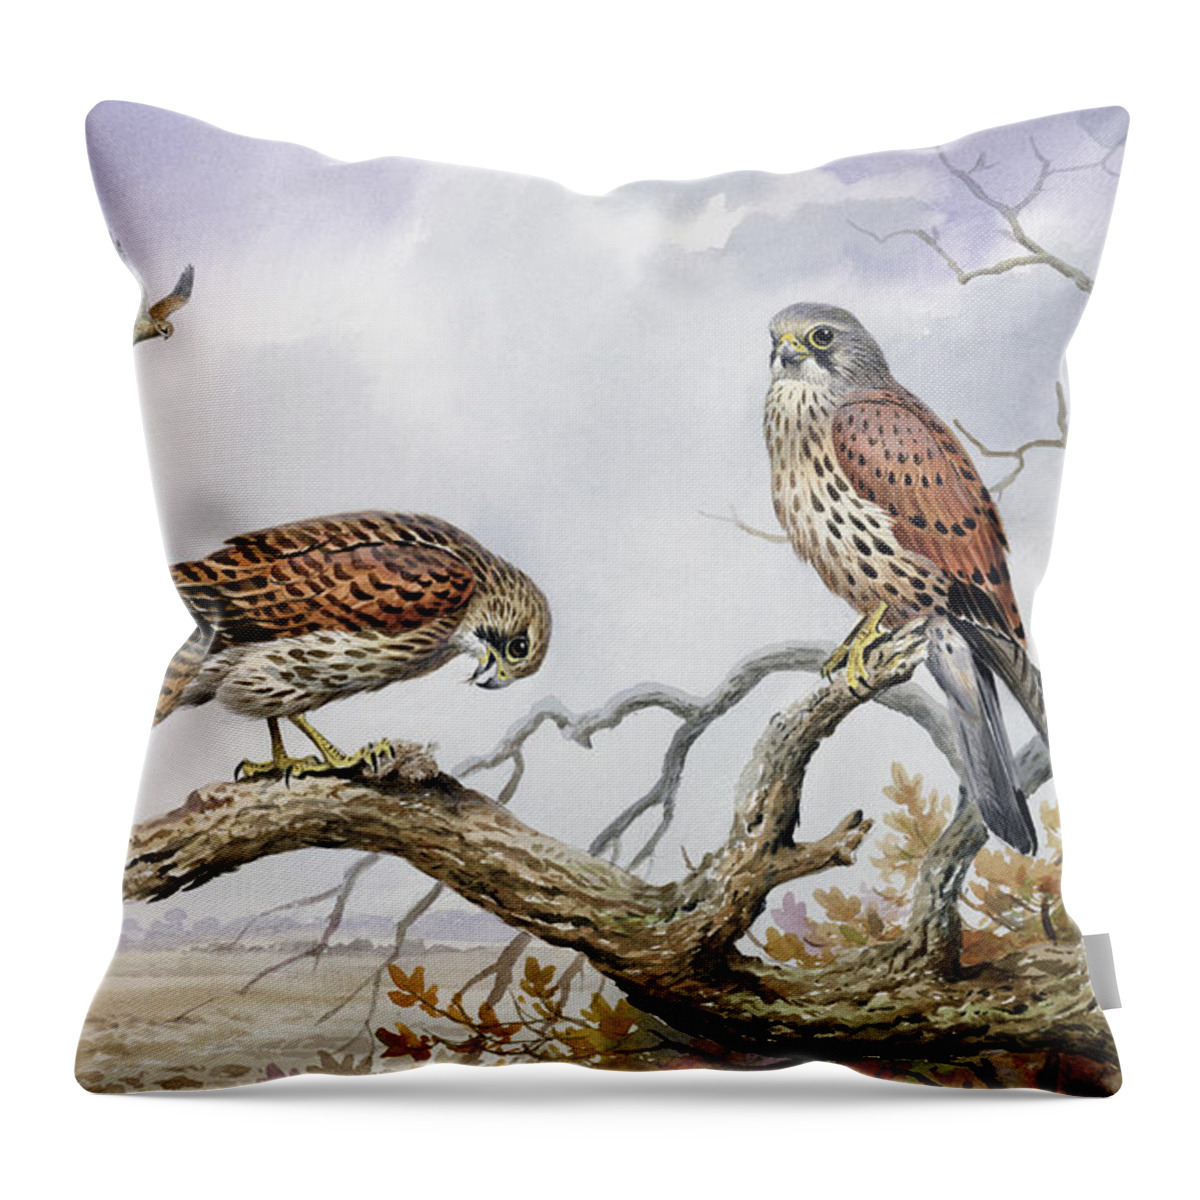 Hovering; Perched; Bird Eating; Tree Tops; Birds; Bird Of Prey; Faucon Crecerelle; Falco Tinnunculus; Landscape Throw Pillow featuring the painting Pair of Kestrels by Carl Donner 